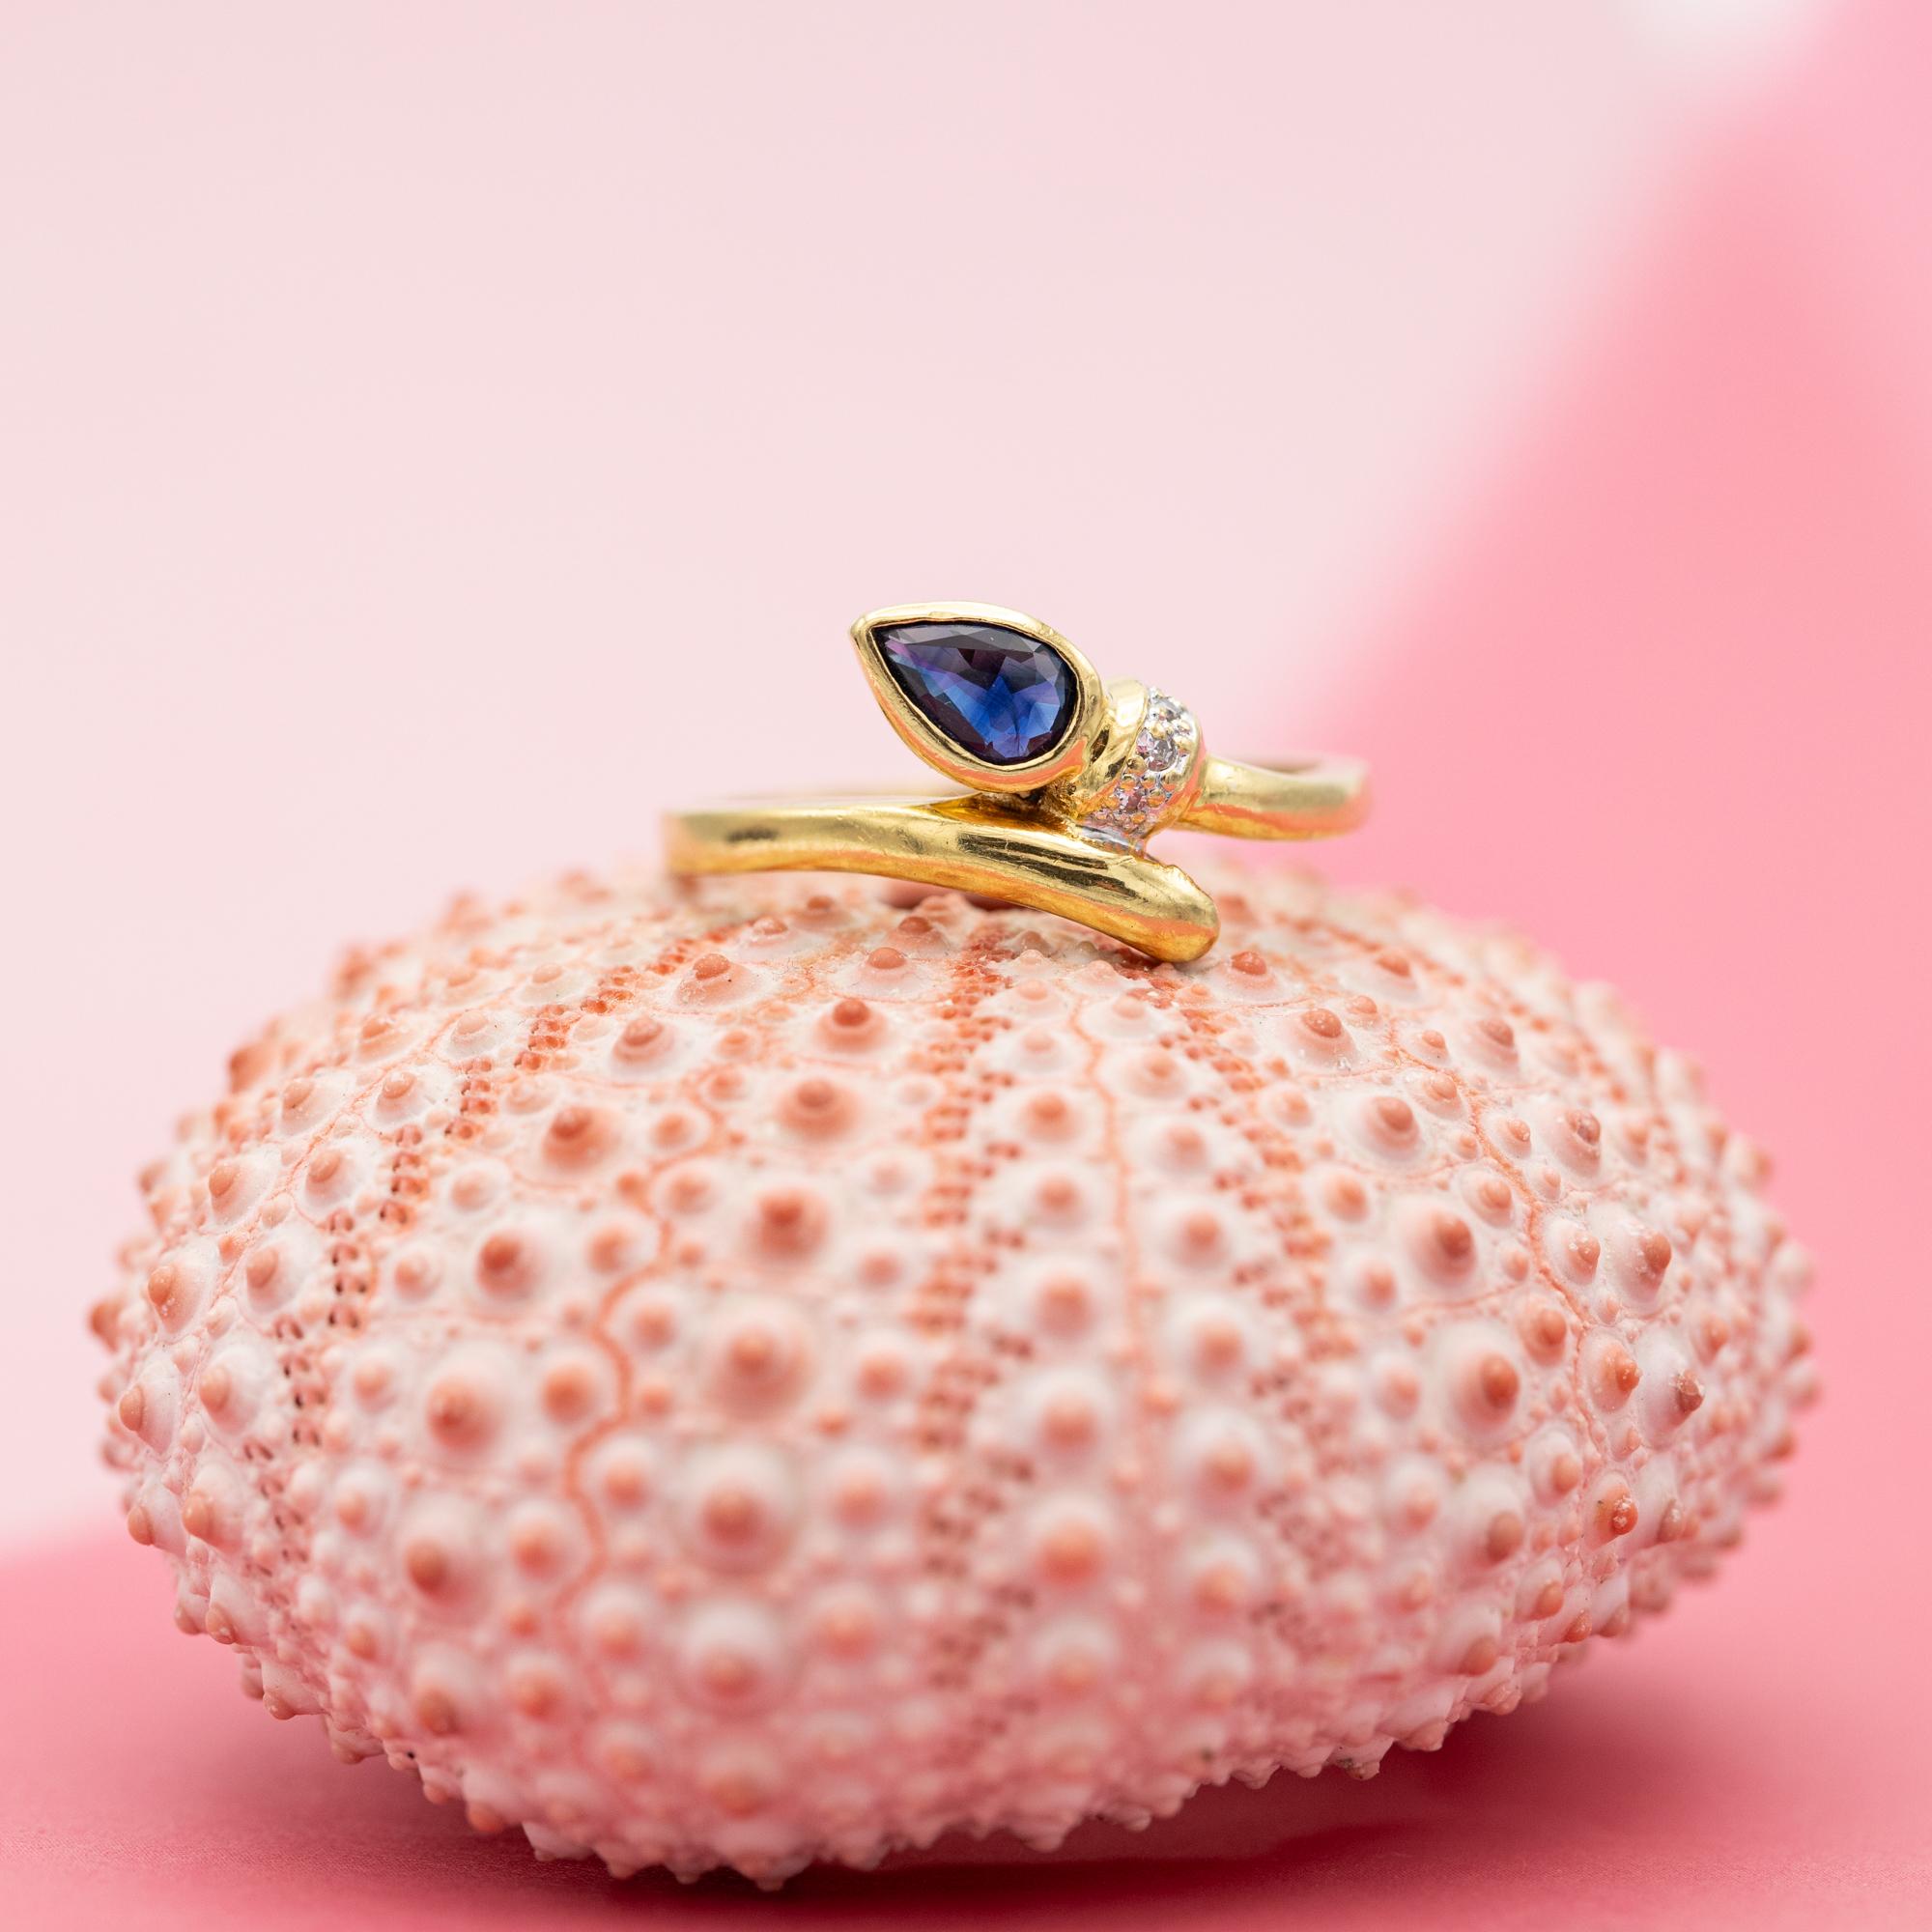 For sale is this stunning 18 ct yellow gold snake ring. It's head is made out of a pear shaped sapphire while three small single cut diamonds bring the snakes to live, we adore the details in this ring. This ring is most likely crafted in the late